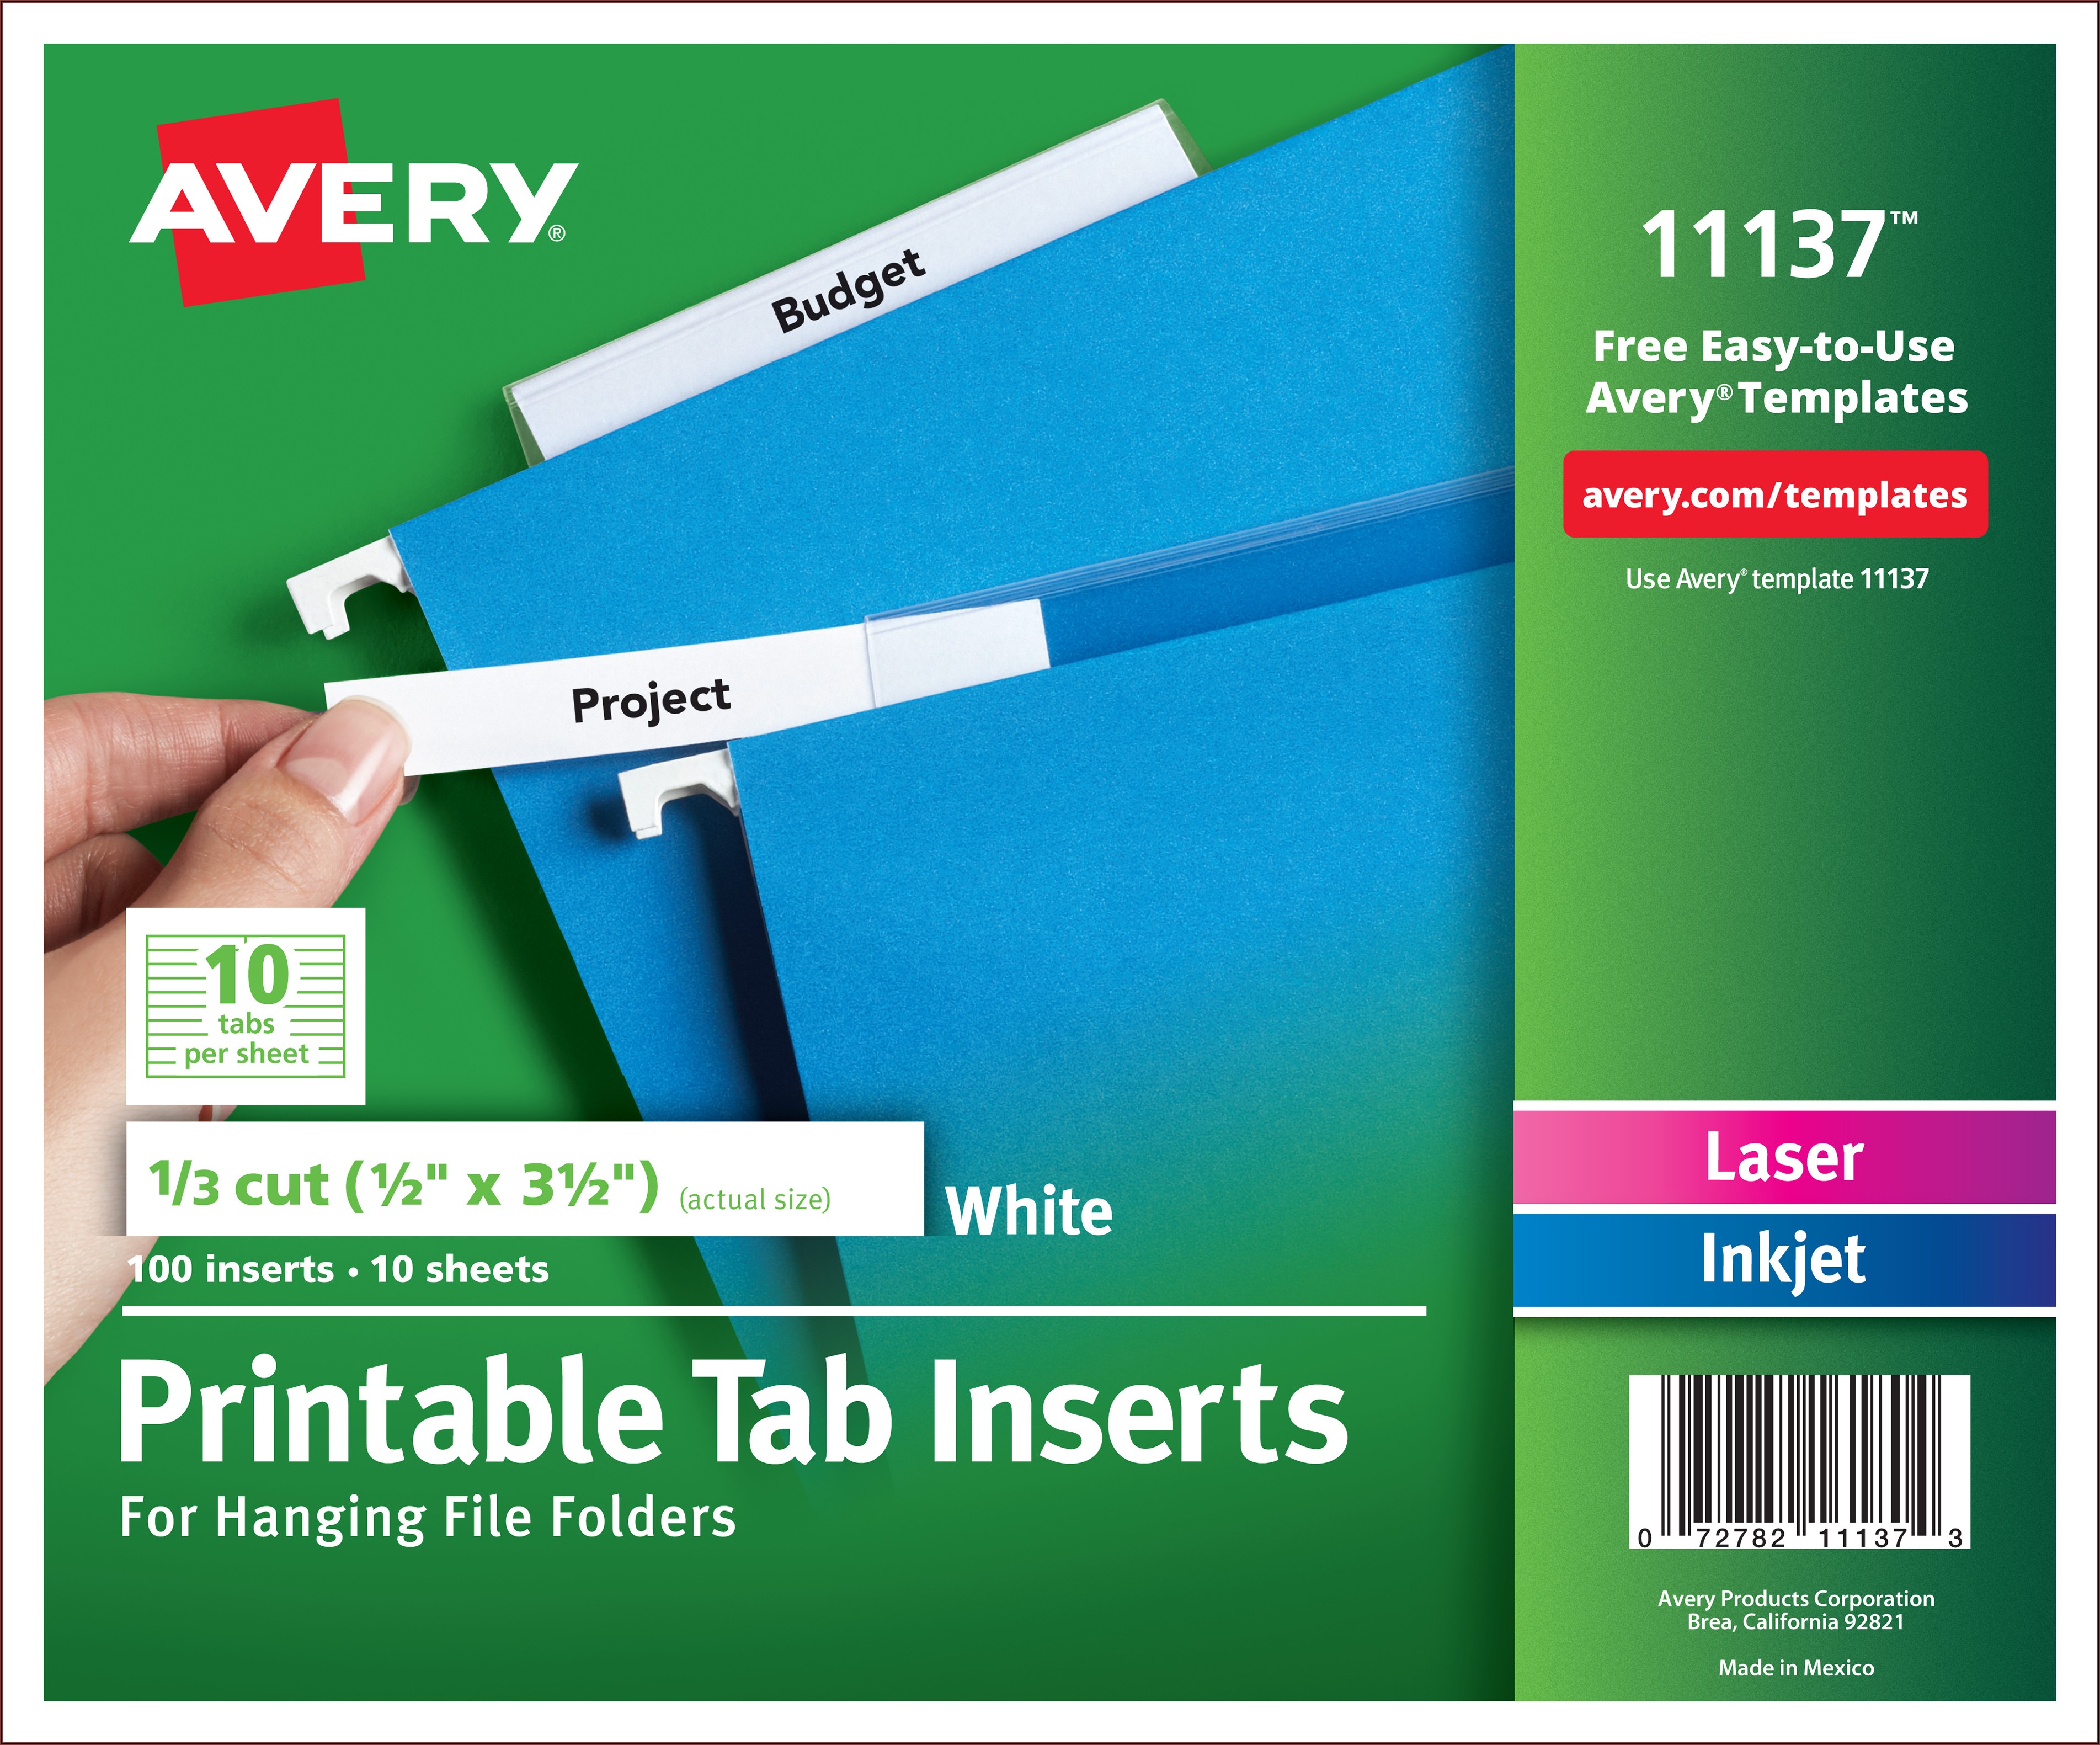 avery-11136-template